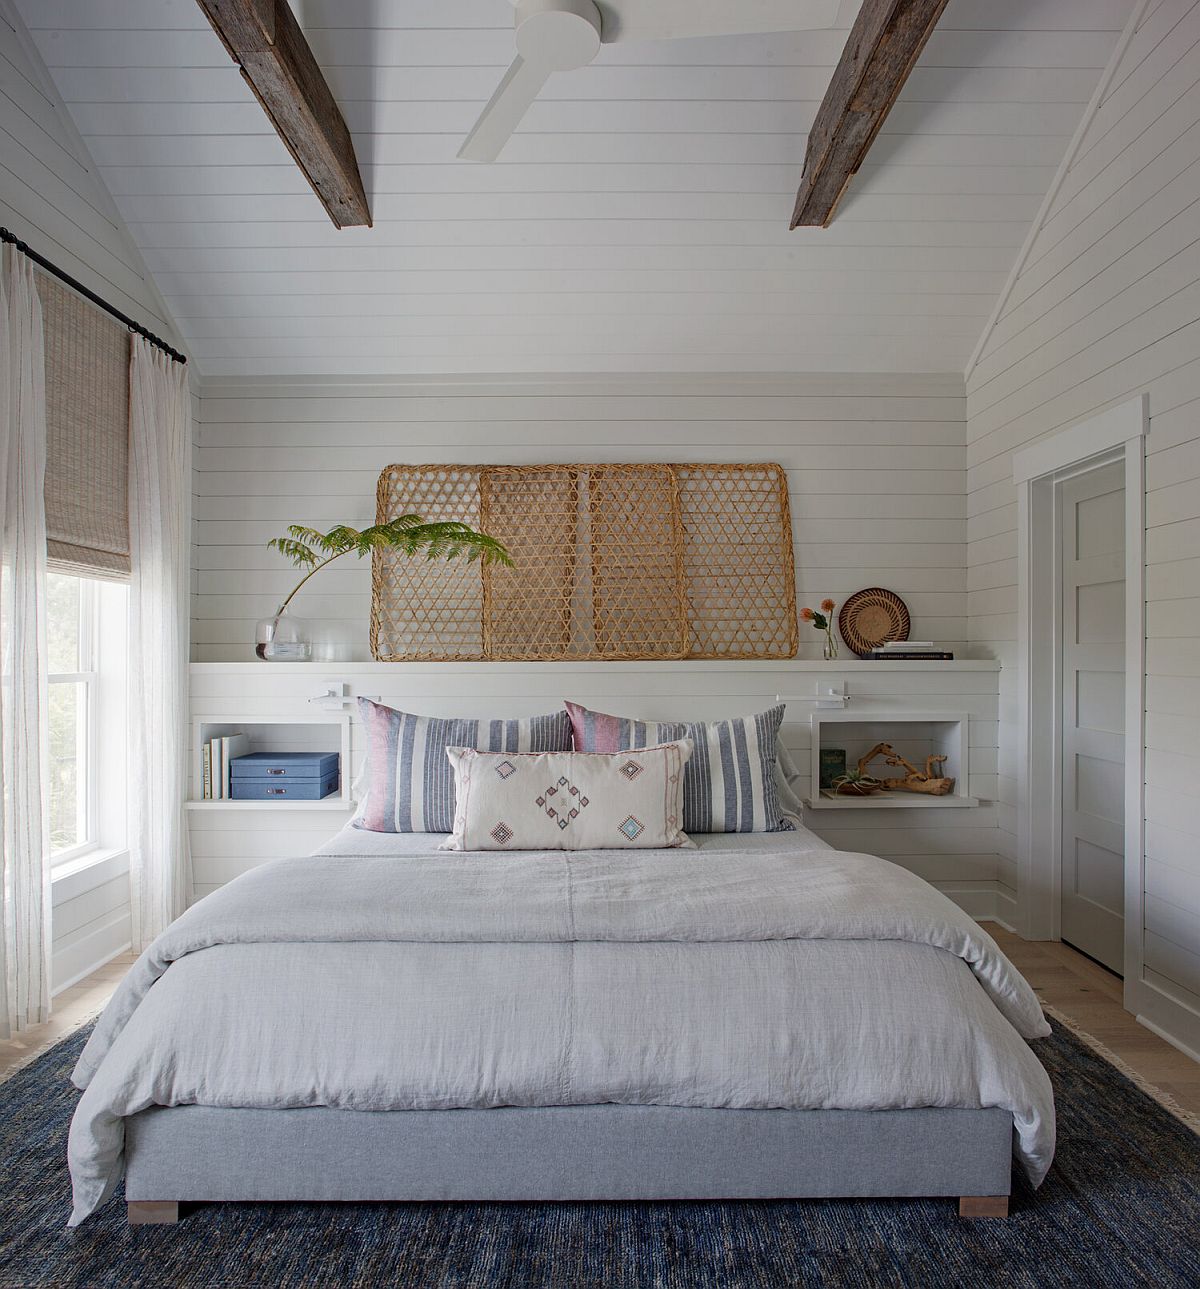 Delightful-blend-of-bohemian-and-beach-style-create-a-relaxing-bedroom-33540